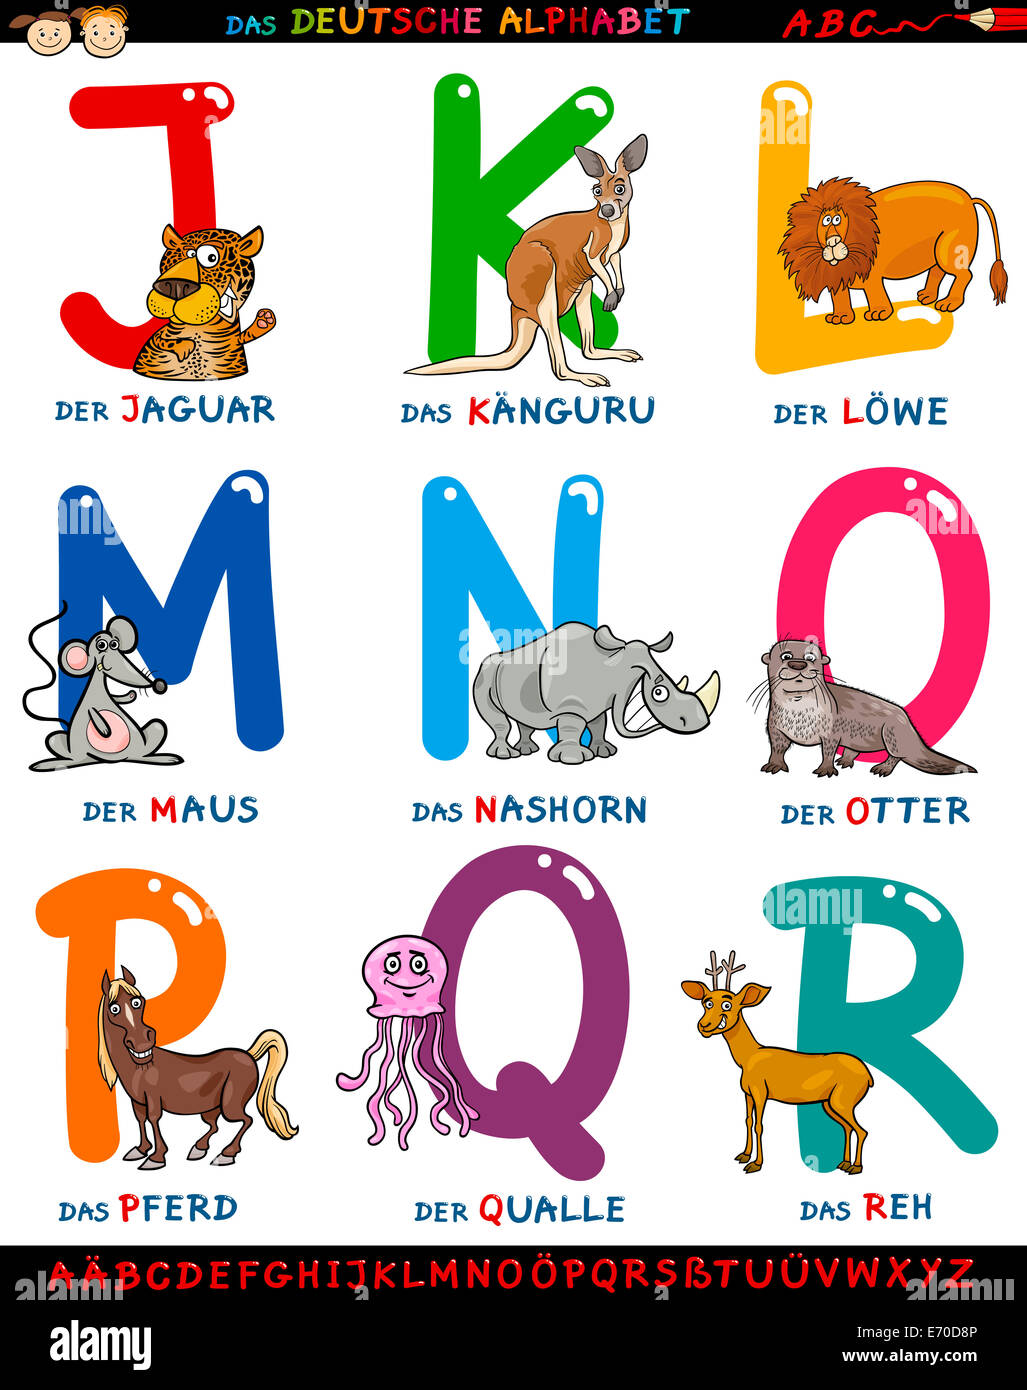 Cartoon Illustration of Colorful German or Deutsch Alphabet Set with Funny  Animals from Letter J to R Stock Photo - Alamy